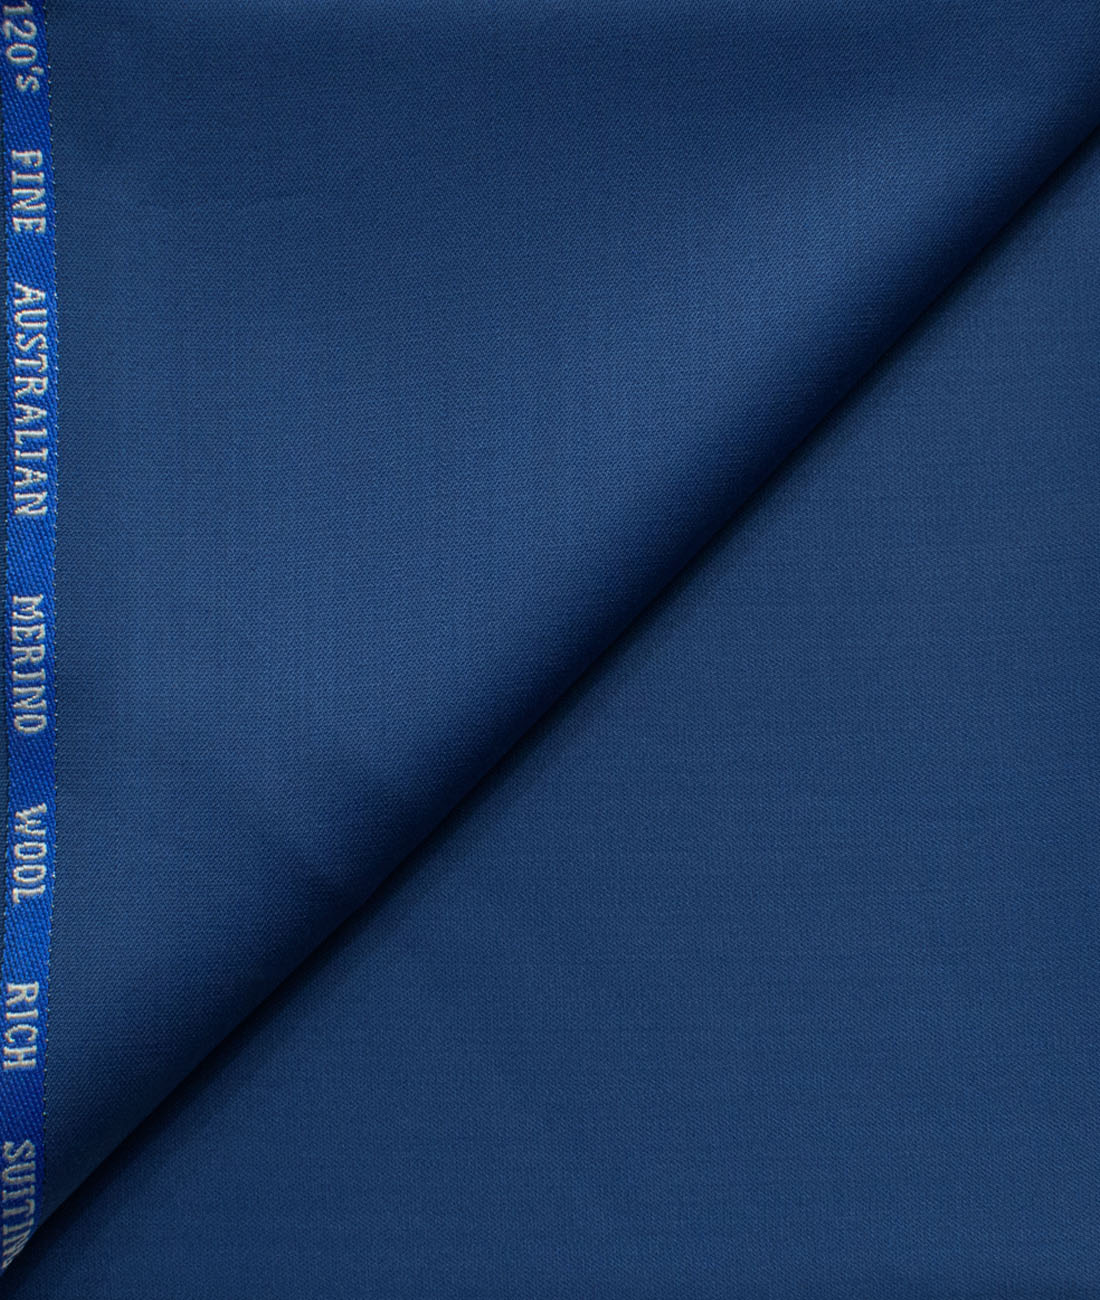 Worsted Wool Fabric: 100% Worsted Wool Super 160's Men's Exclusive Fabrics  from Belgium by Scabal, SKU 00034697 at $20900 — Buy Worsted Wool Fabrics  Online